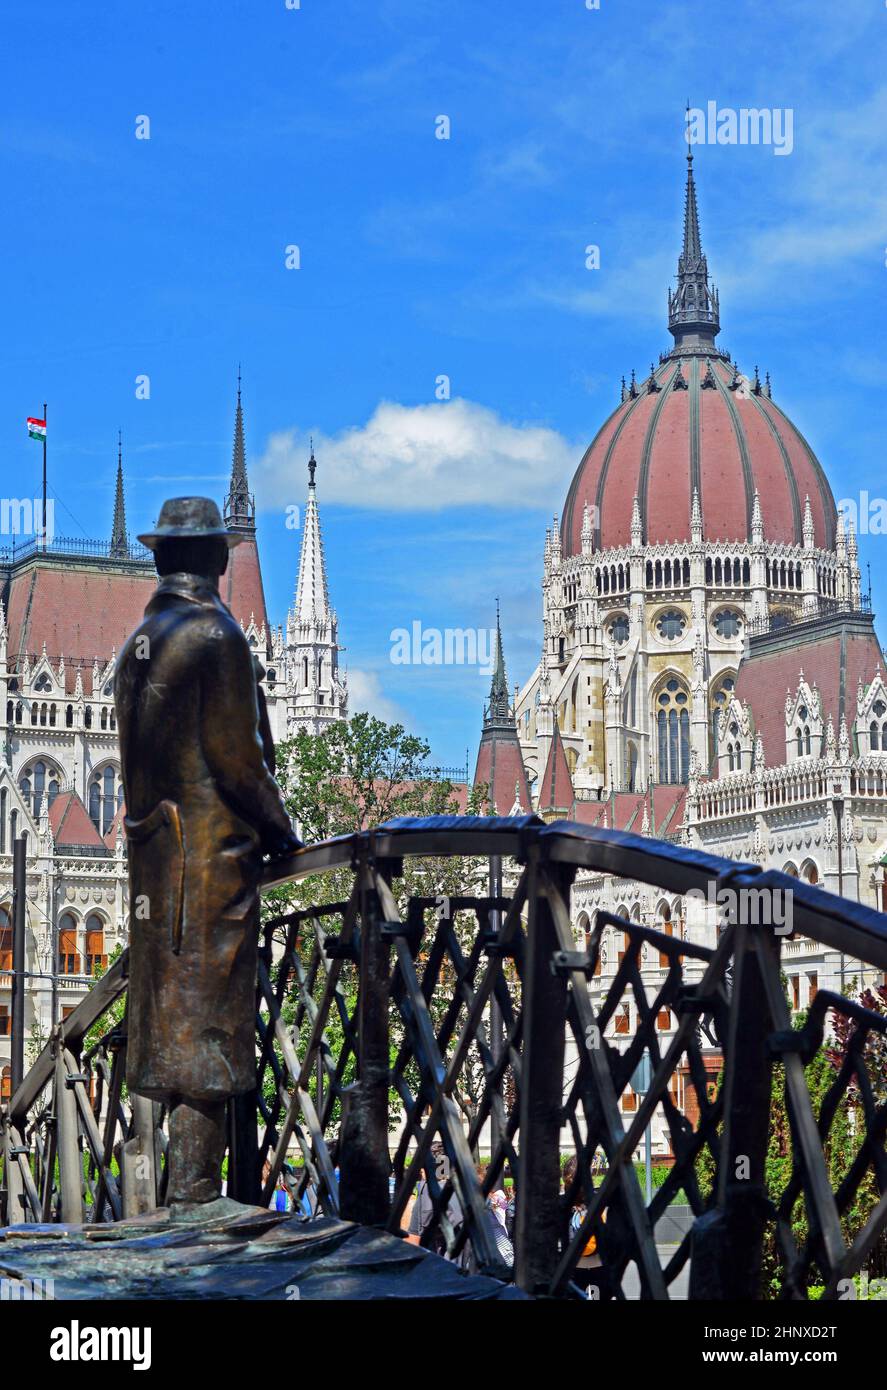 Imre Nagy statue  on bridge in Martyr's Square,  looks towards The hungarian Parliament, Budapest, Hungary. Now removed Stock Photo